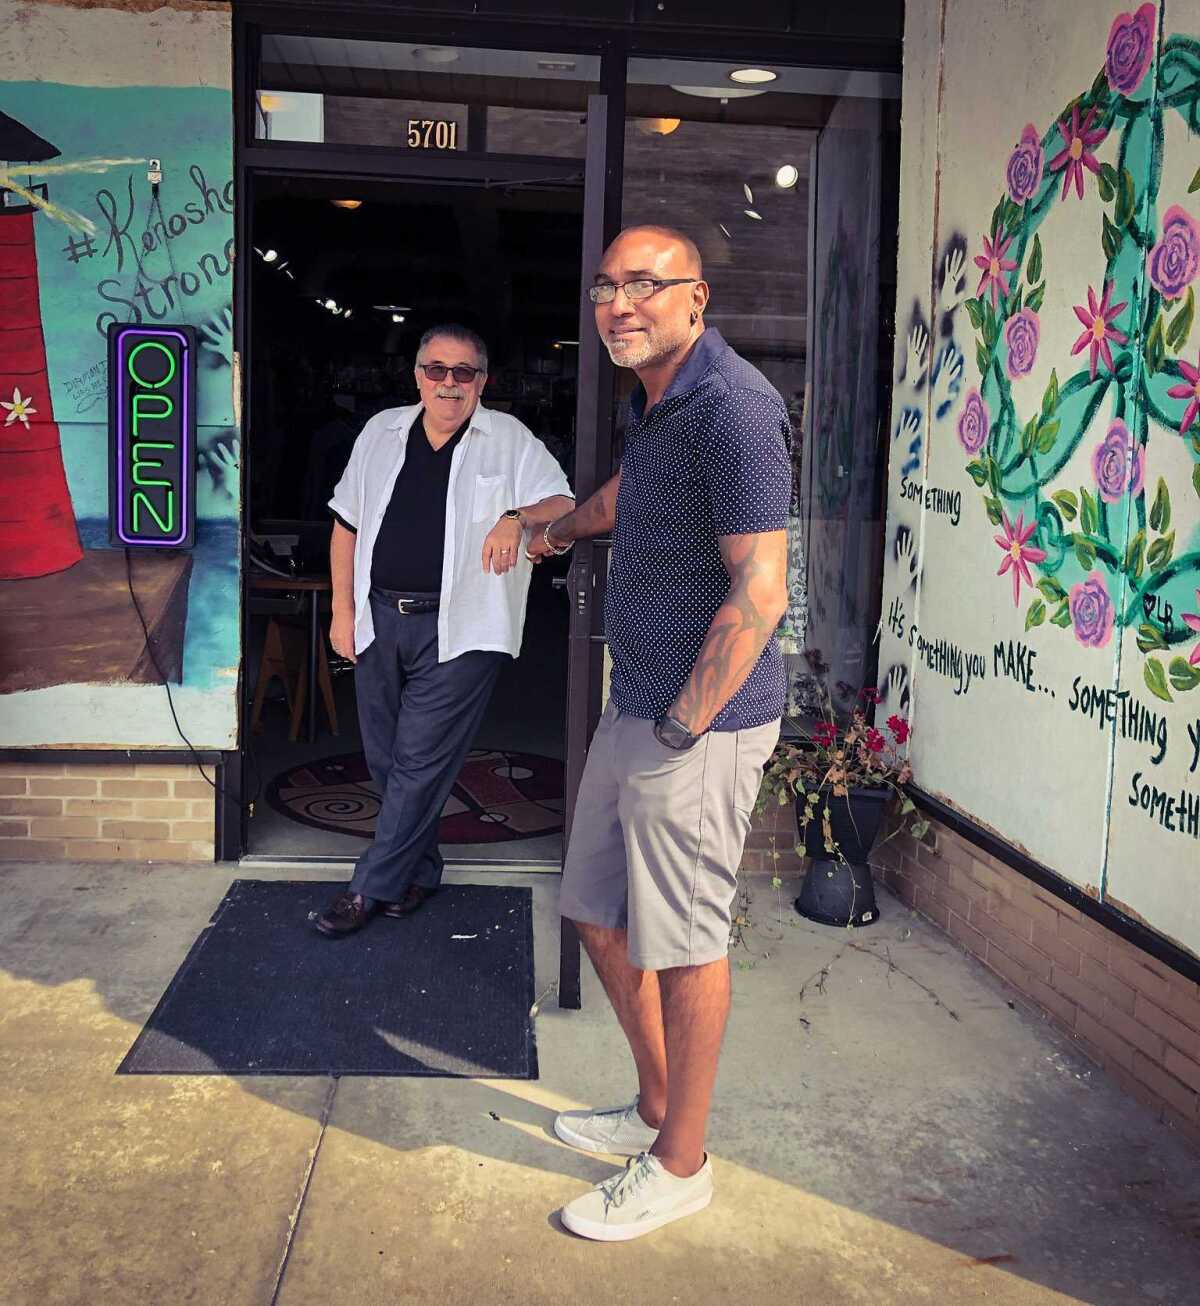 Shad DeLacy and Lewis Aceto stand in a storefront in Kenosha, Wis.